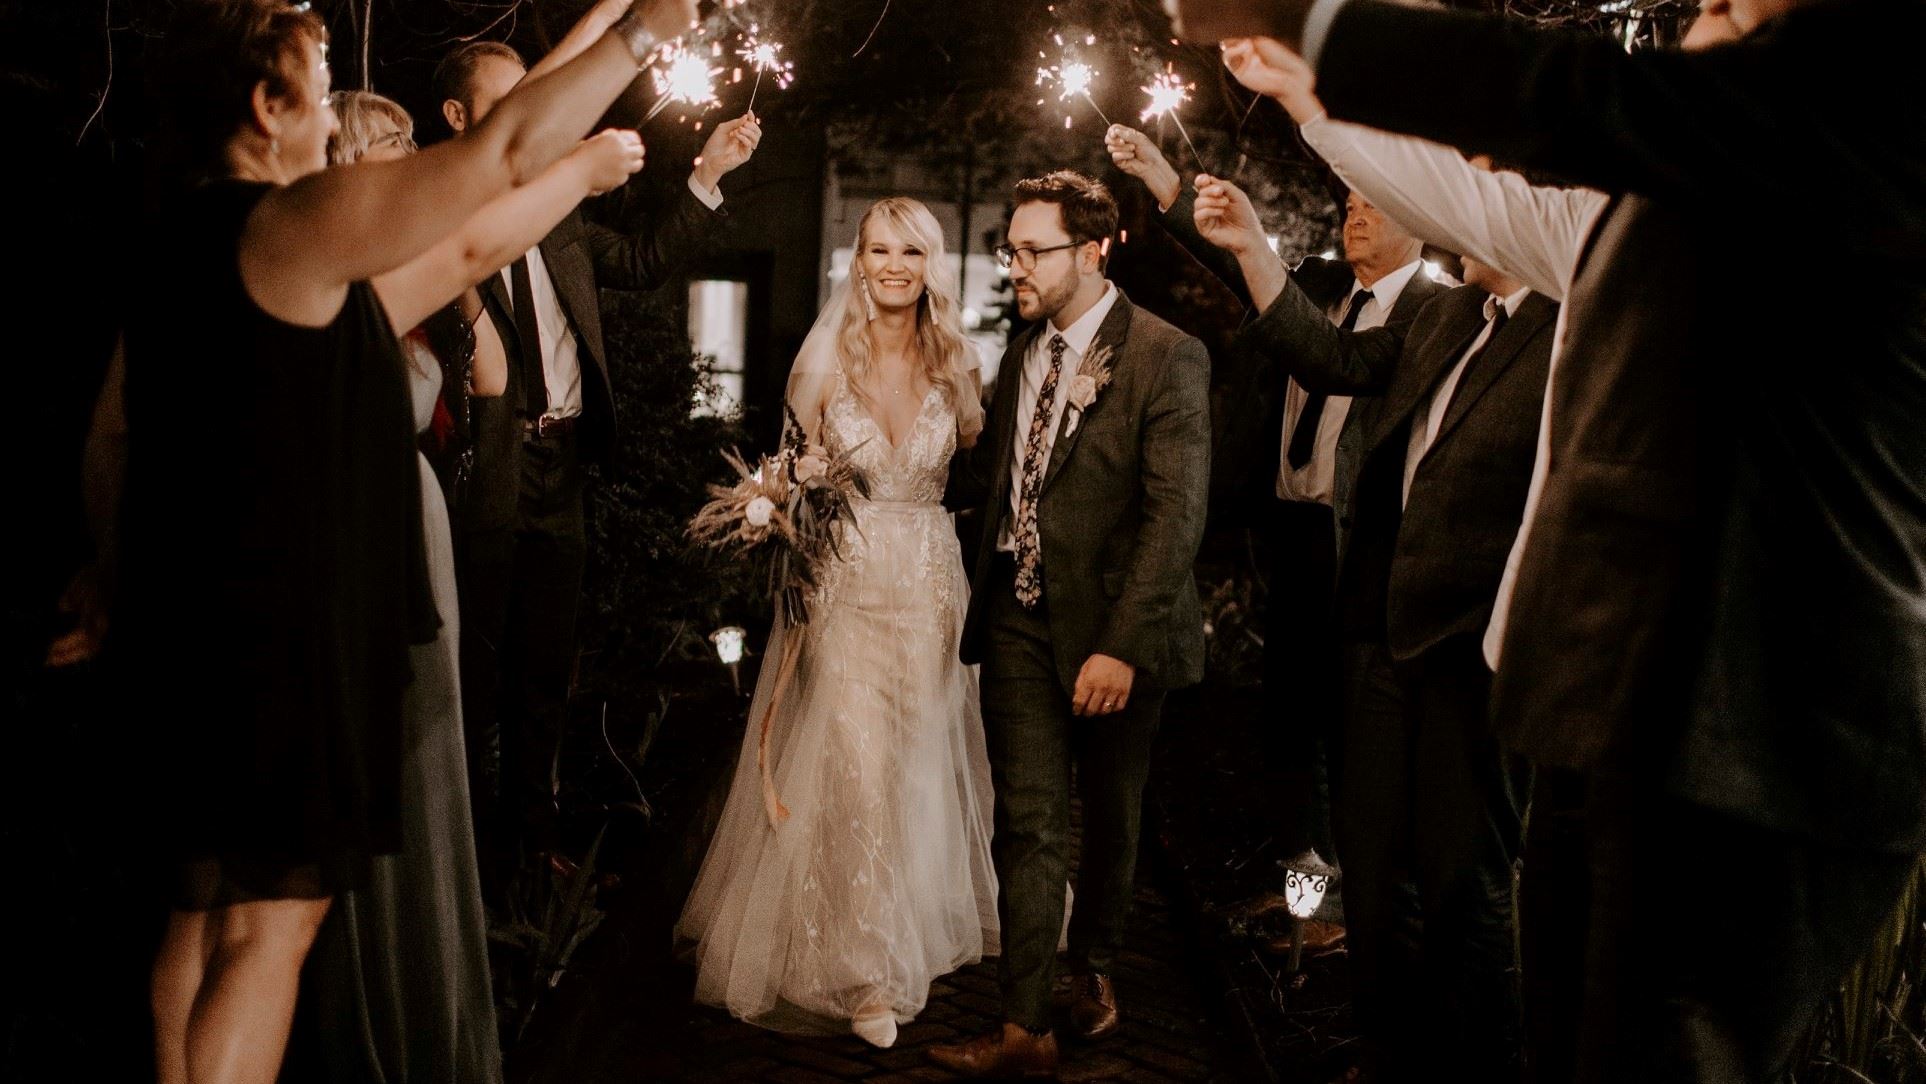 A Stunning Micro Wedding in the Age of COVID-19